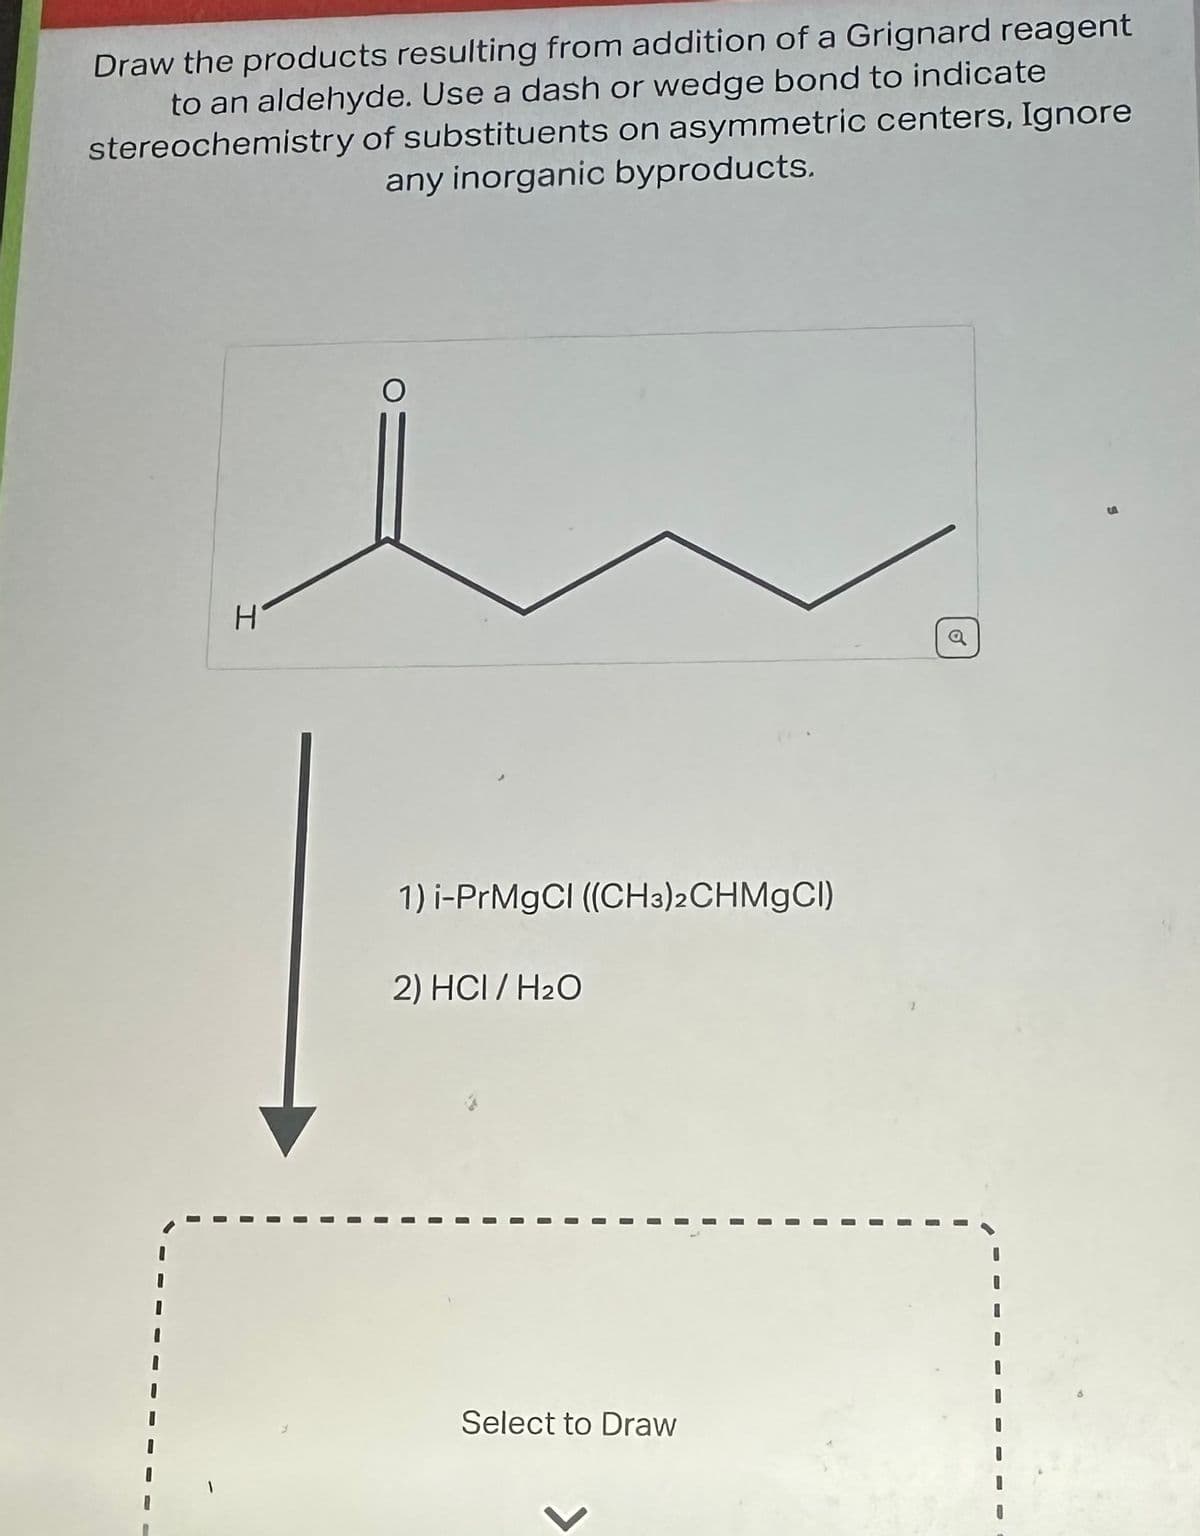 Draw the products resulting from addition of a Grignard reagent
to an aldehyde. Use a dash or wedge bond to indicate
stereochemistry of substituents on asymmetric centers, Ignore
any inorganic byproducts.
H
1) i-PrMgCl ((CH3)2CHMgCl)
2) HCI/H₂O
Select to Draw
2
a